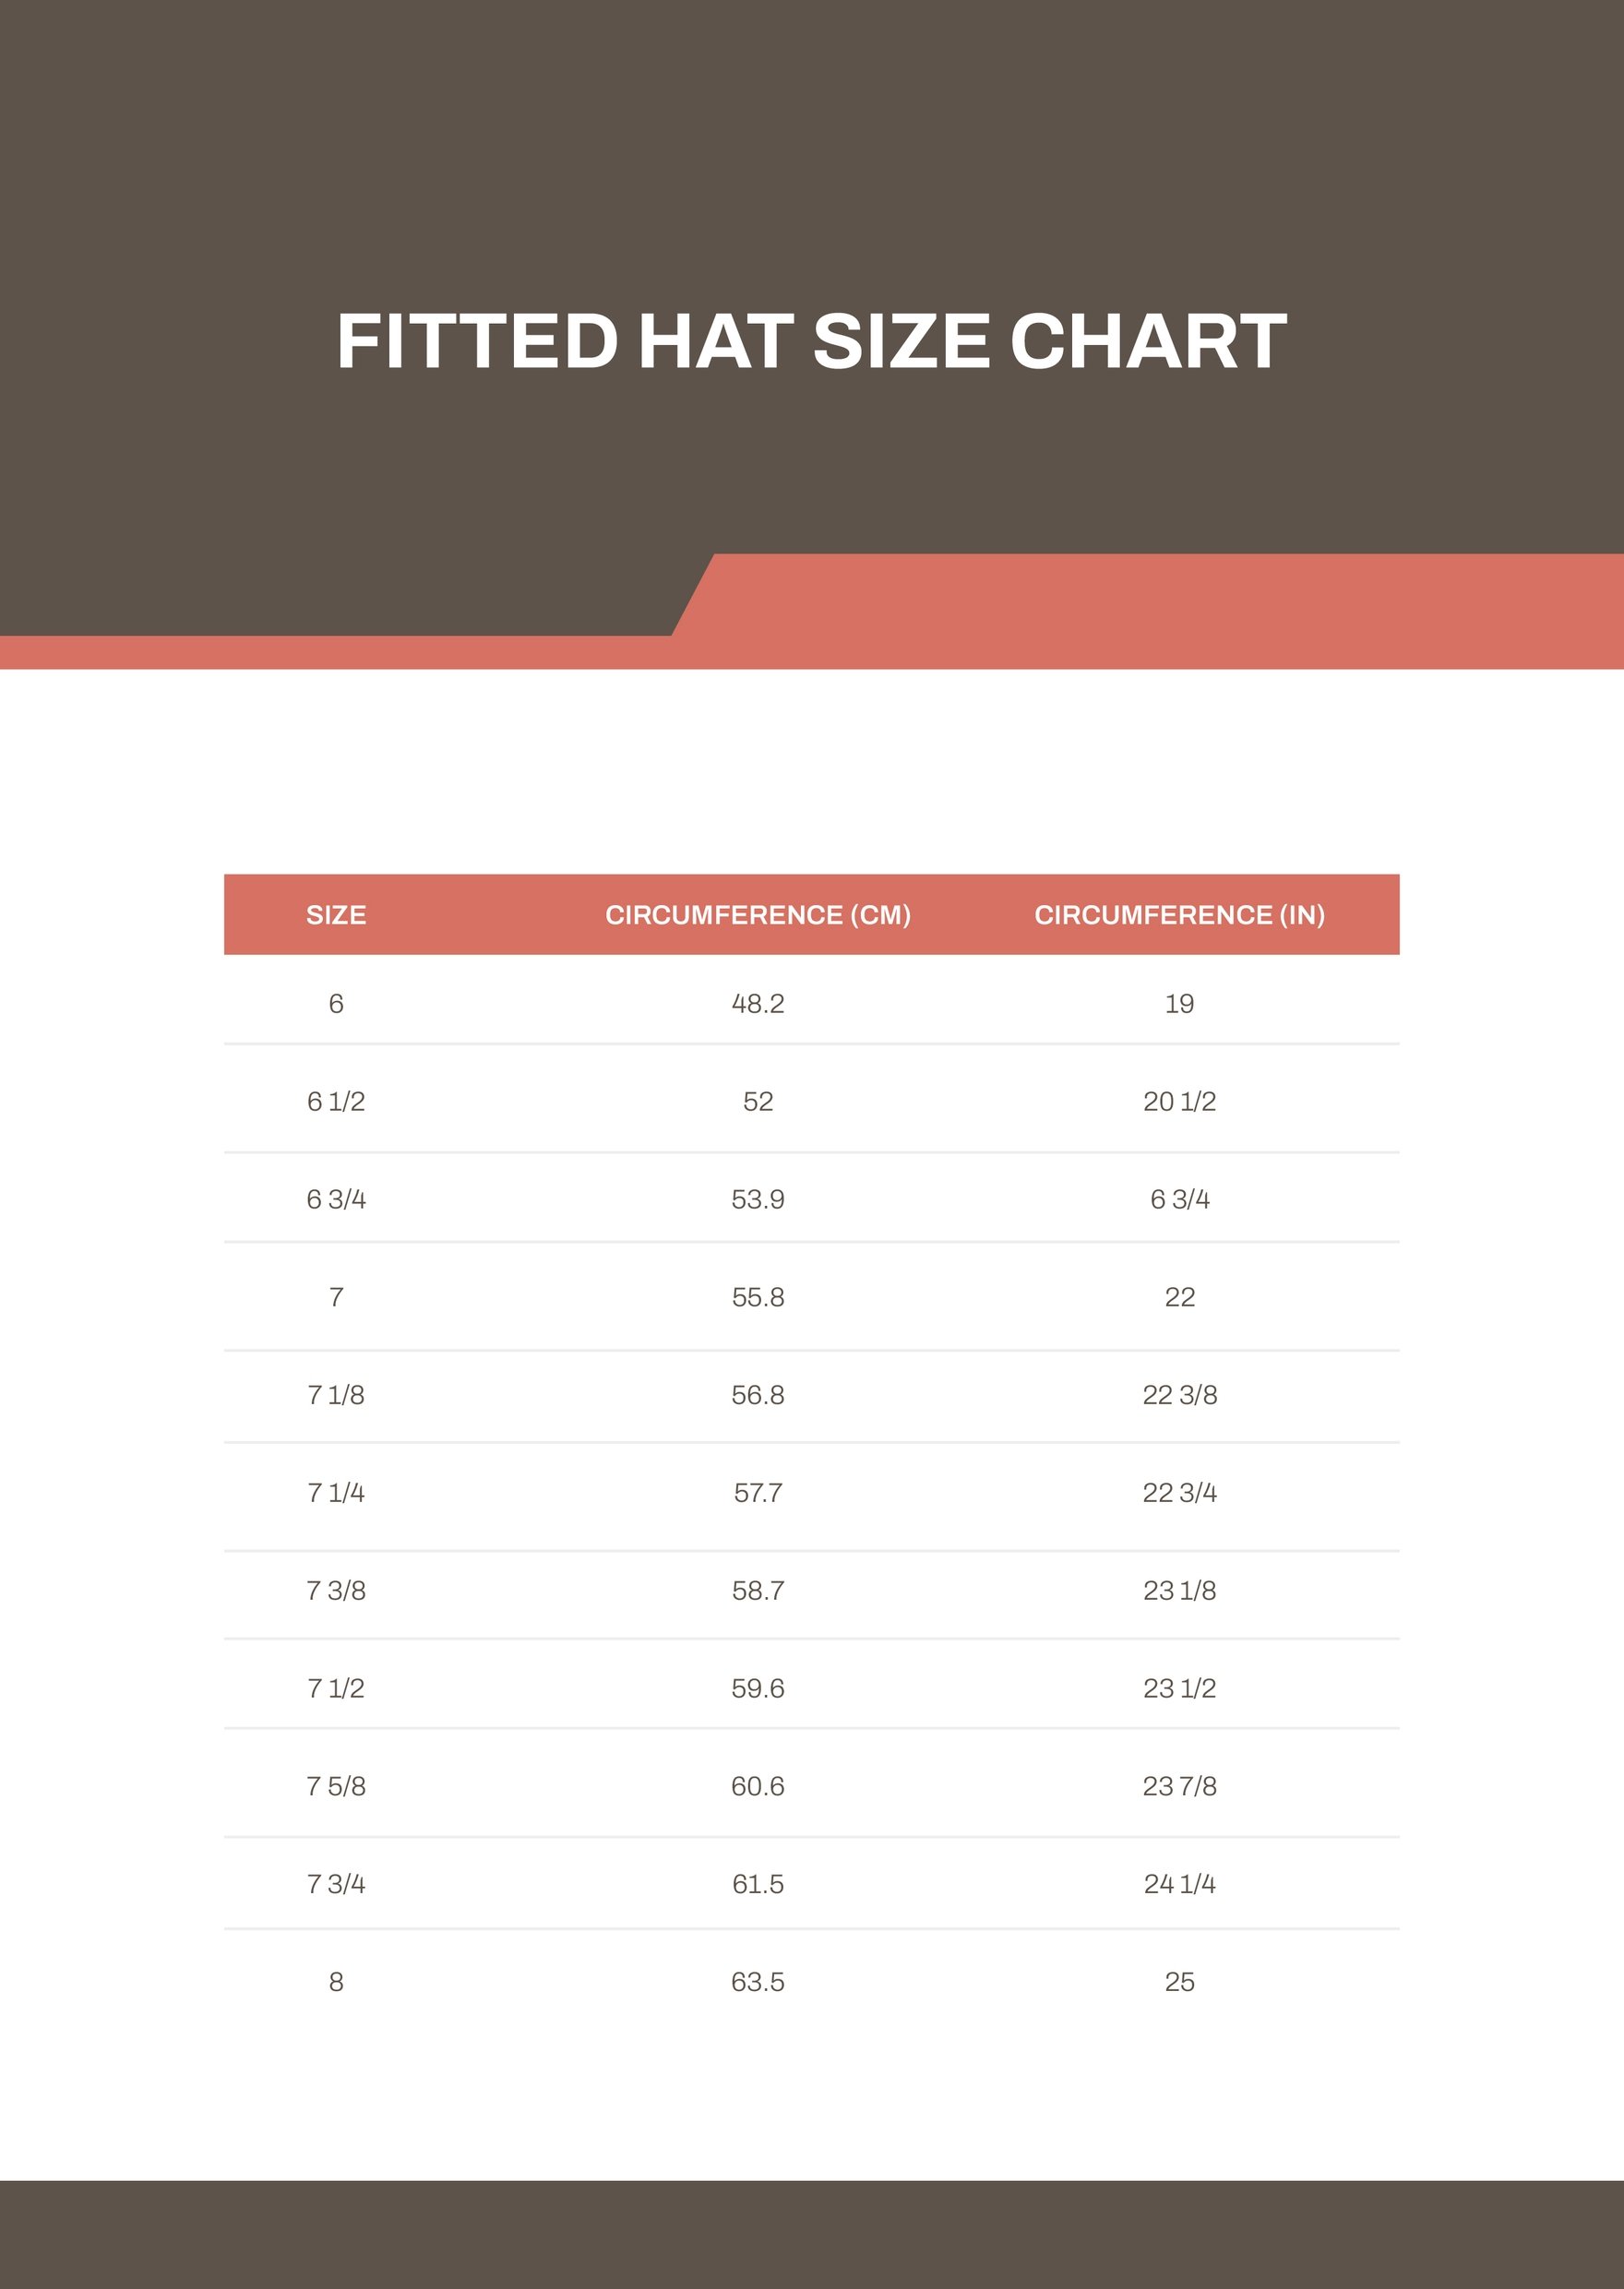 Free Fitted Hat Size Chart - Download in PDF